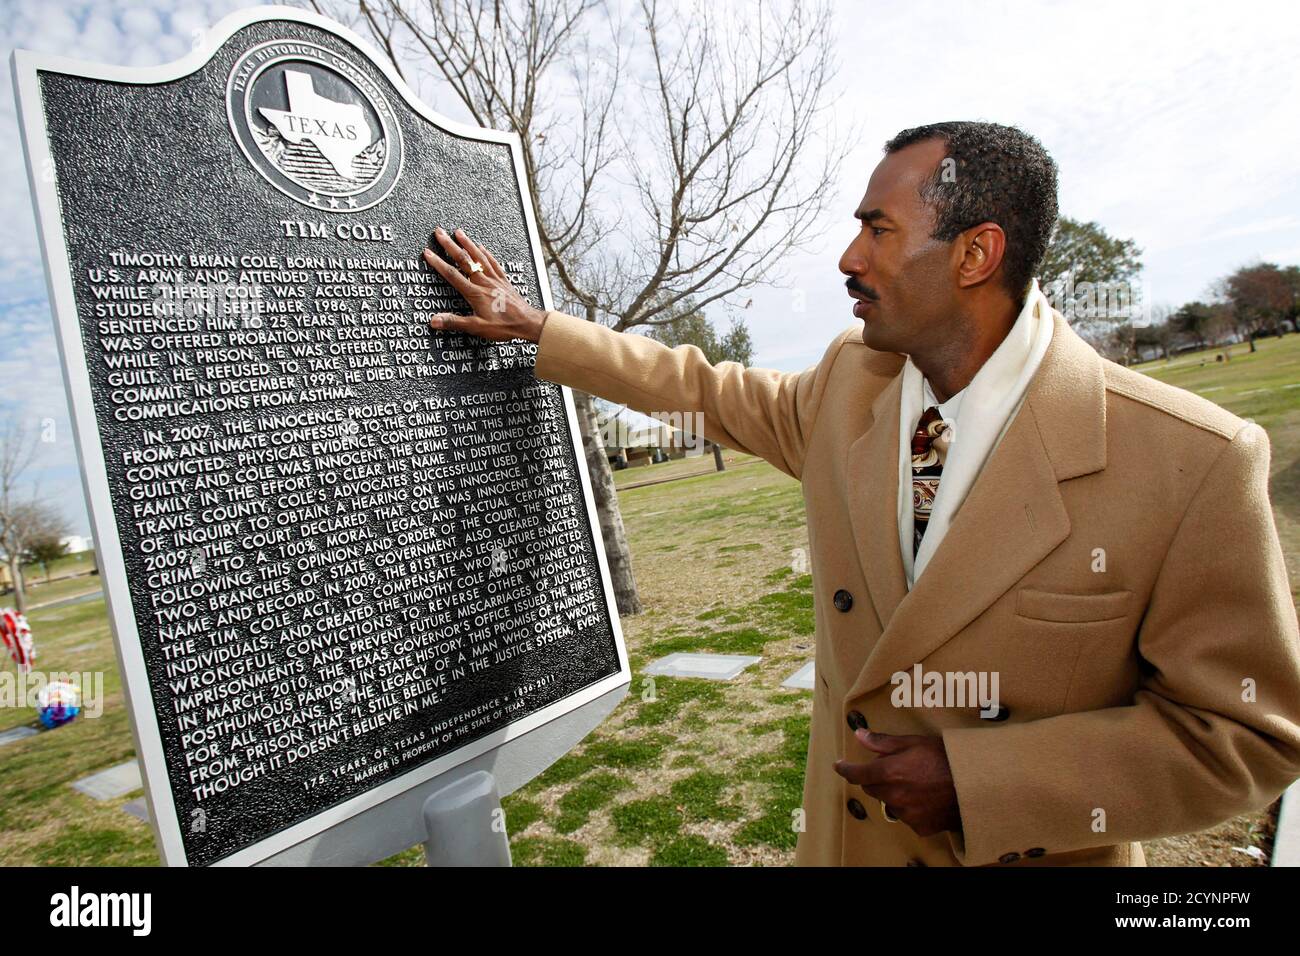 Cory Session, the brother of Tim Cole, the first person in the United  States to be exonerated posthumously on DNA evidence places his hand on a  newly erected historical marker dedicated to